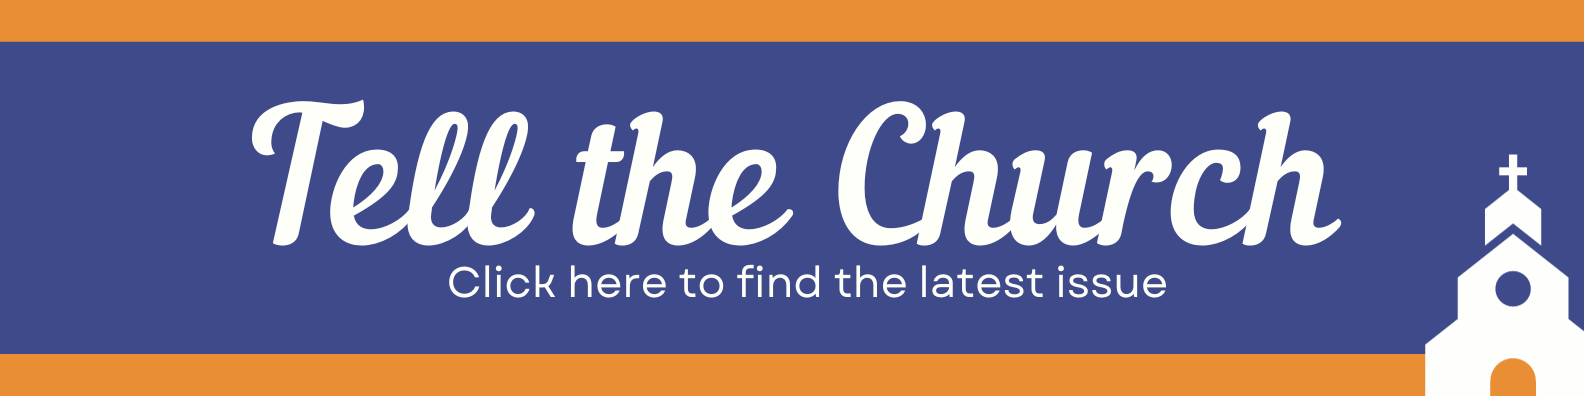 Tell the church - click for the latest issue